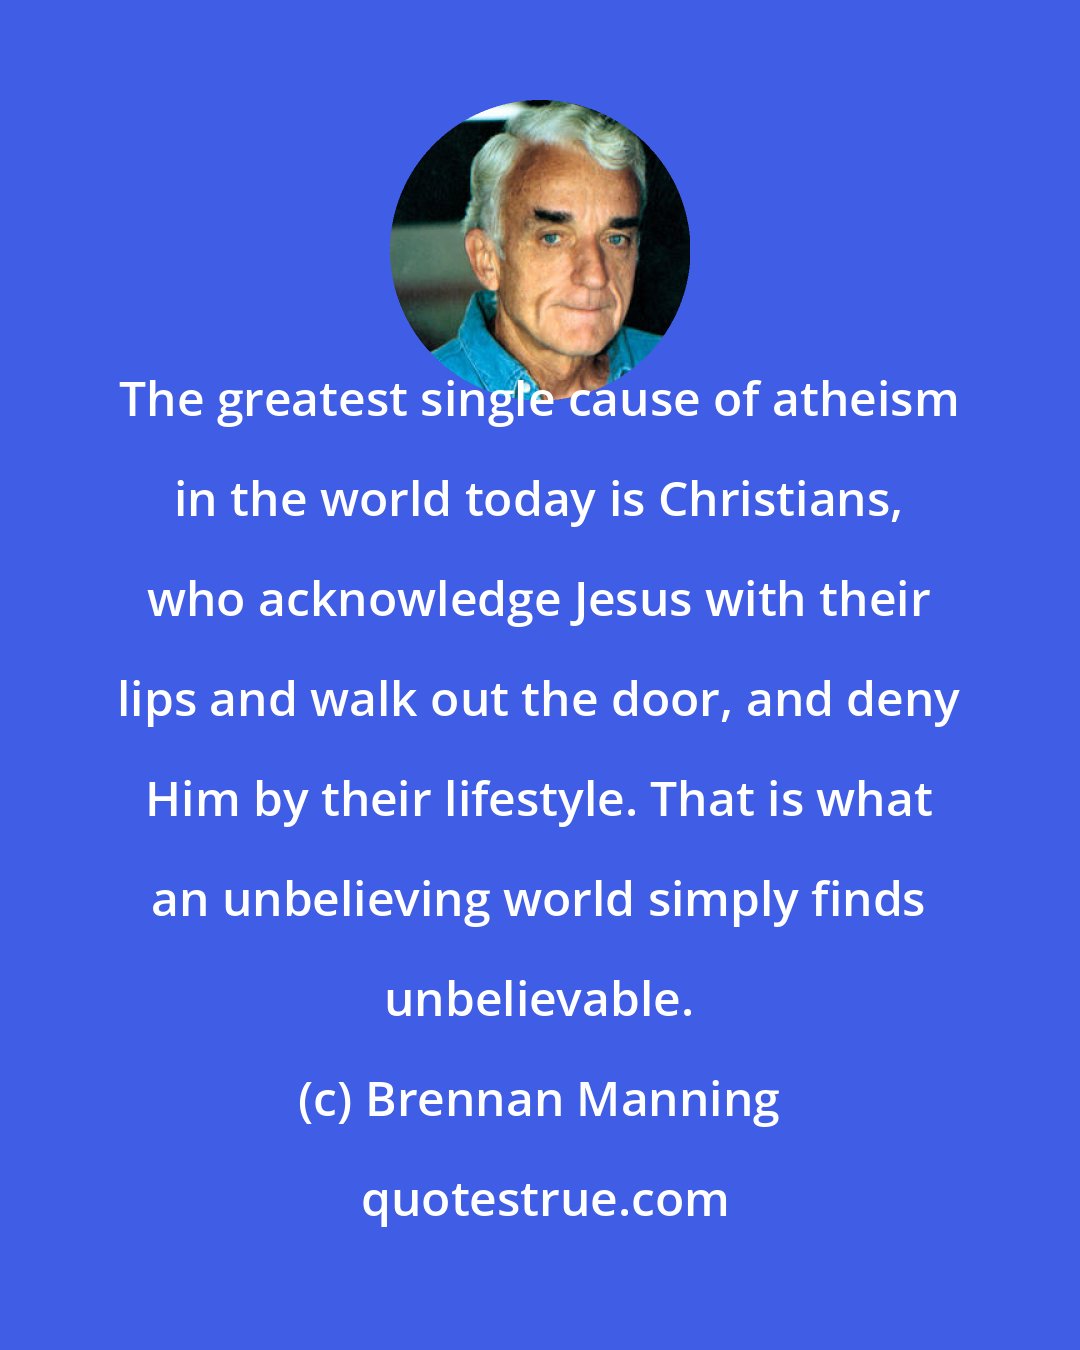 Brennan Manning: The greatest single cause of atheism in the world today is Christians, who acknowledge Jesus with their lips and walk out the door, and deny Him by their lifestyle. That is what an unbelieving world simply finds unbelievable.